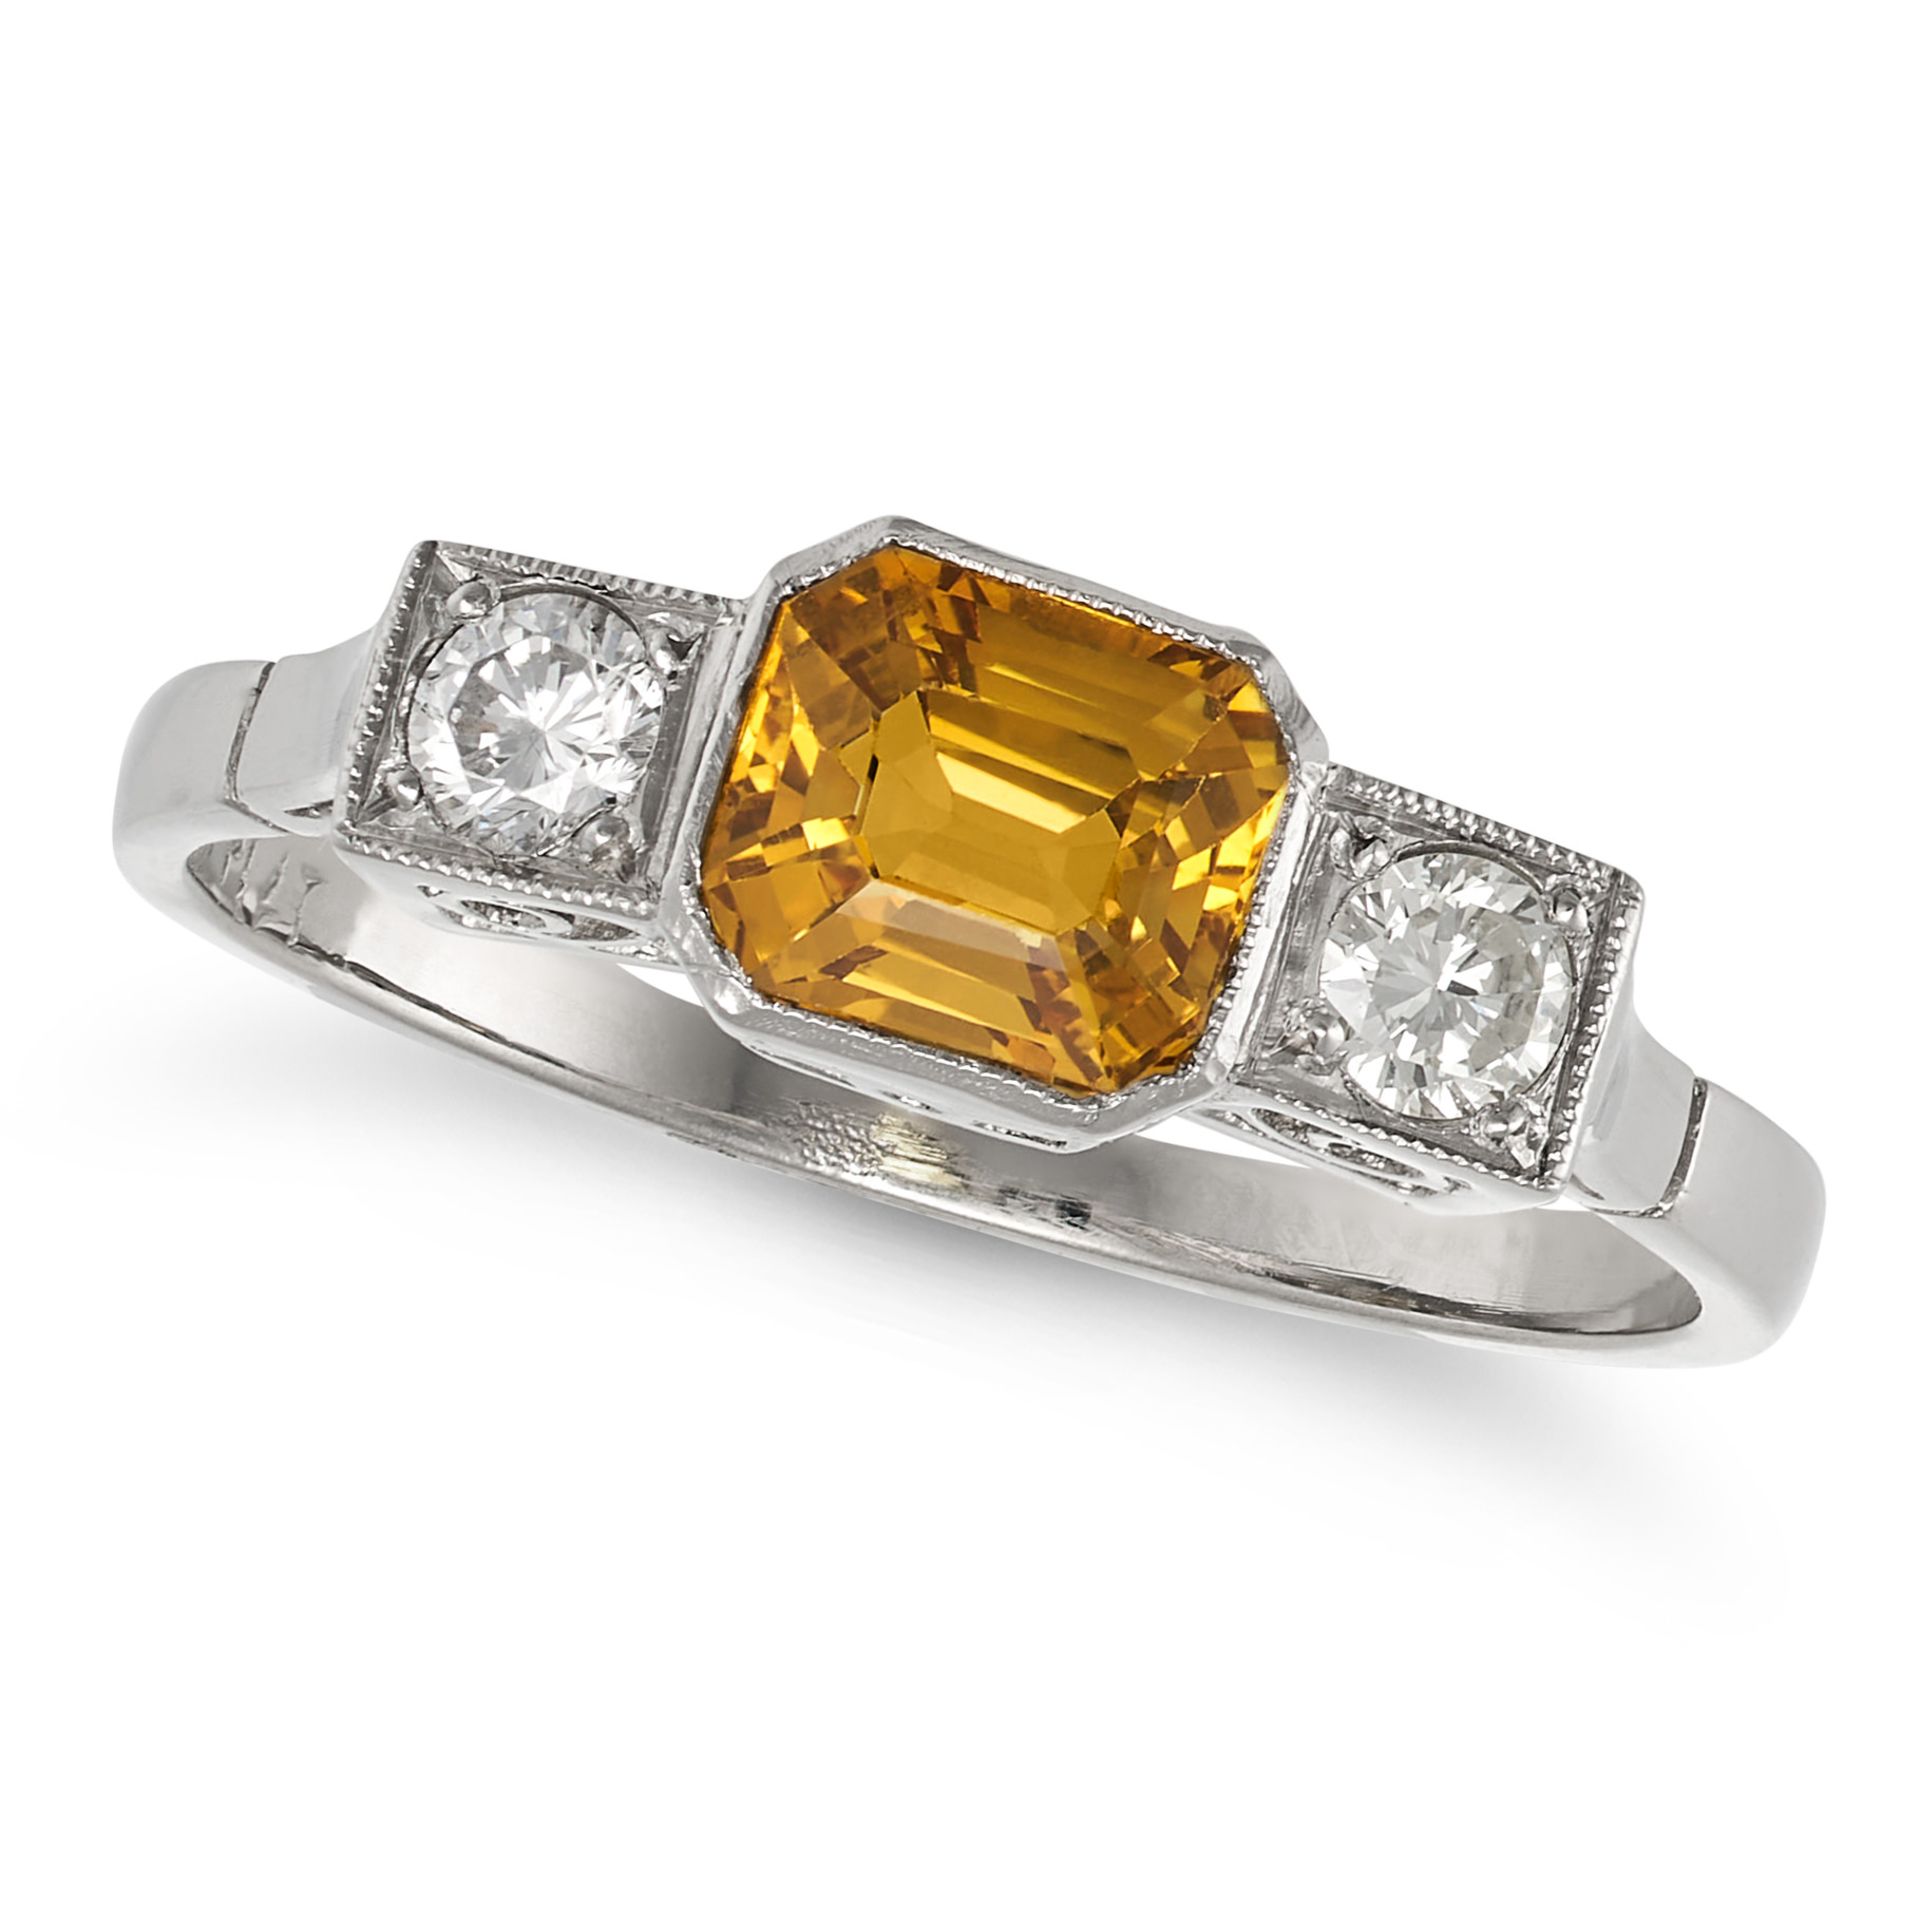 A YELLOW SAPPHIRE AND DIAMOND THREE STONE RING in platinum, set with an octagonal step cut yellow...